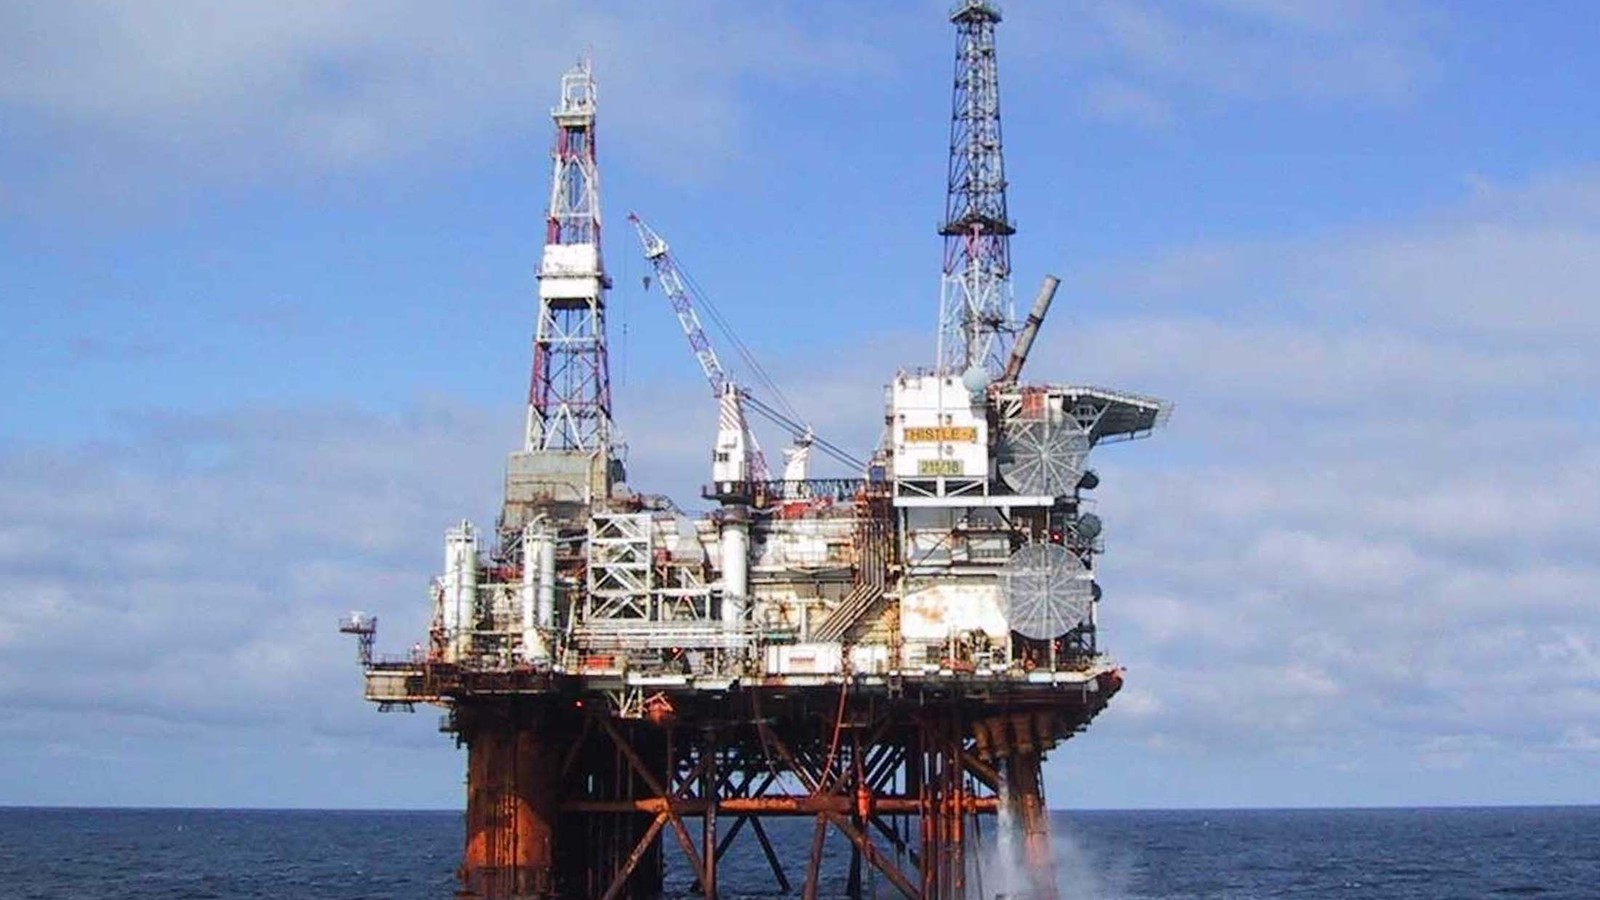 Where oil rigs go to die - Oil - The Guardian